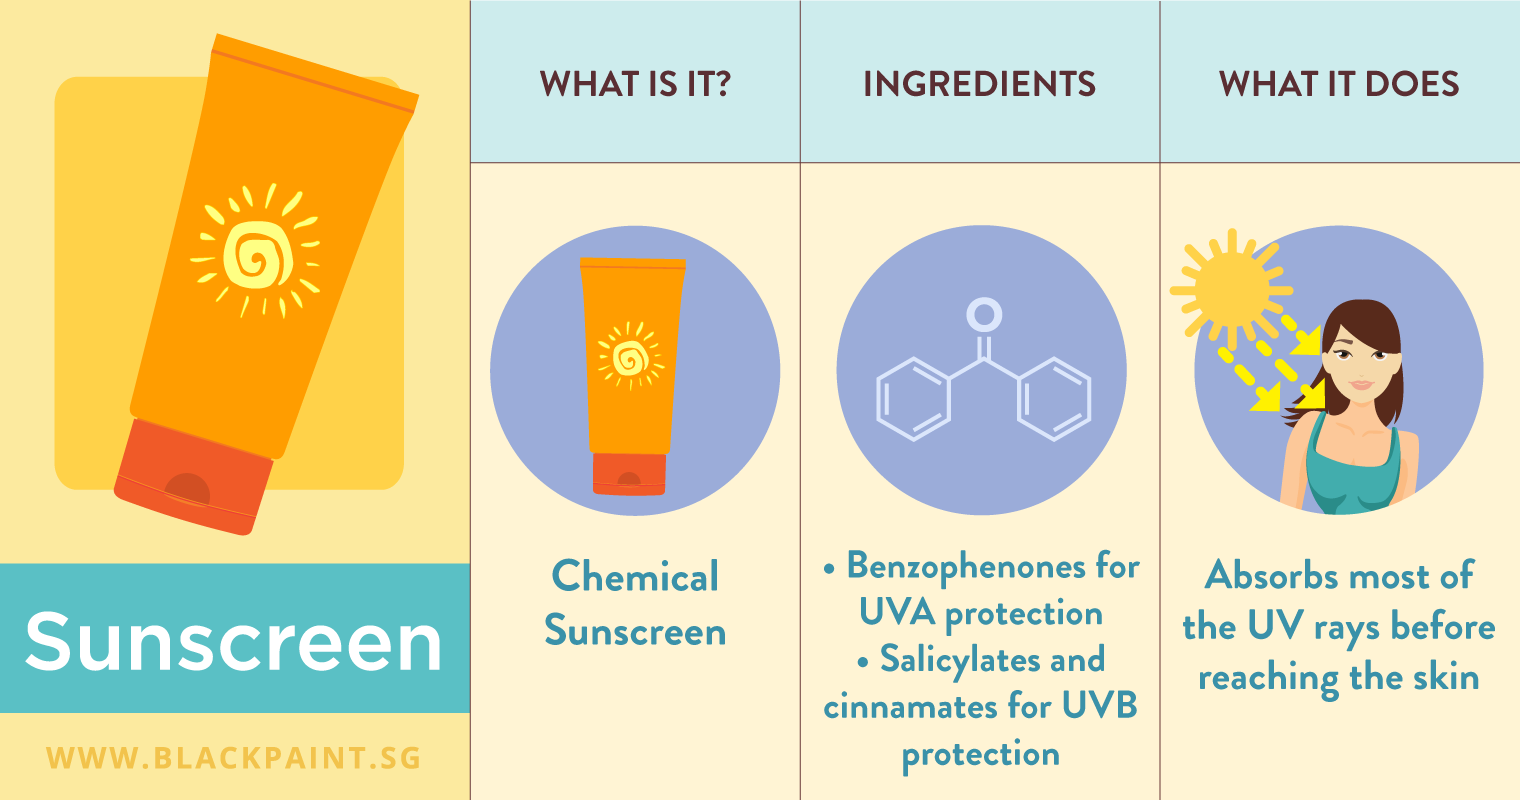 illustration of sunscreen is chemical-based sun protection that absorbs most of UV rays before reaching the skin.